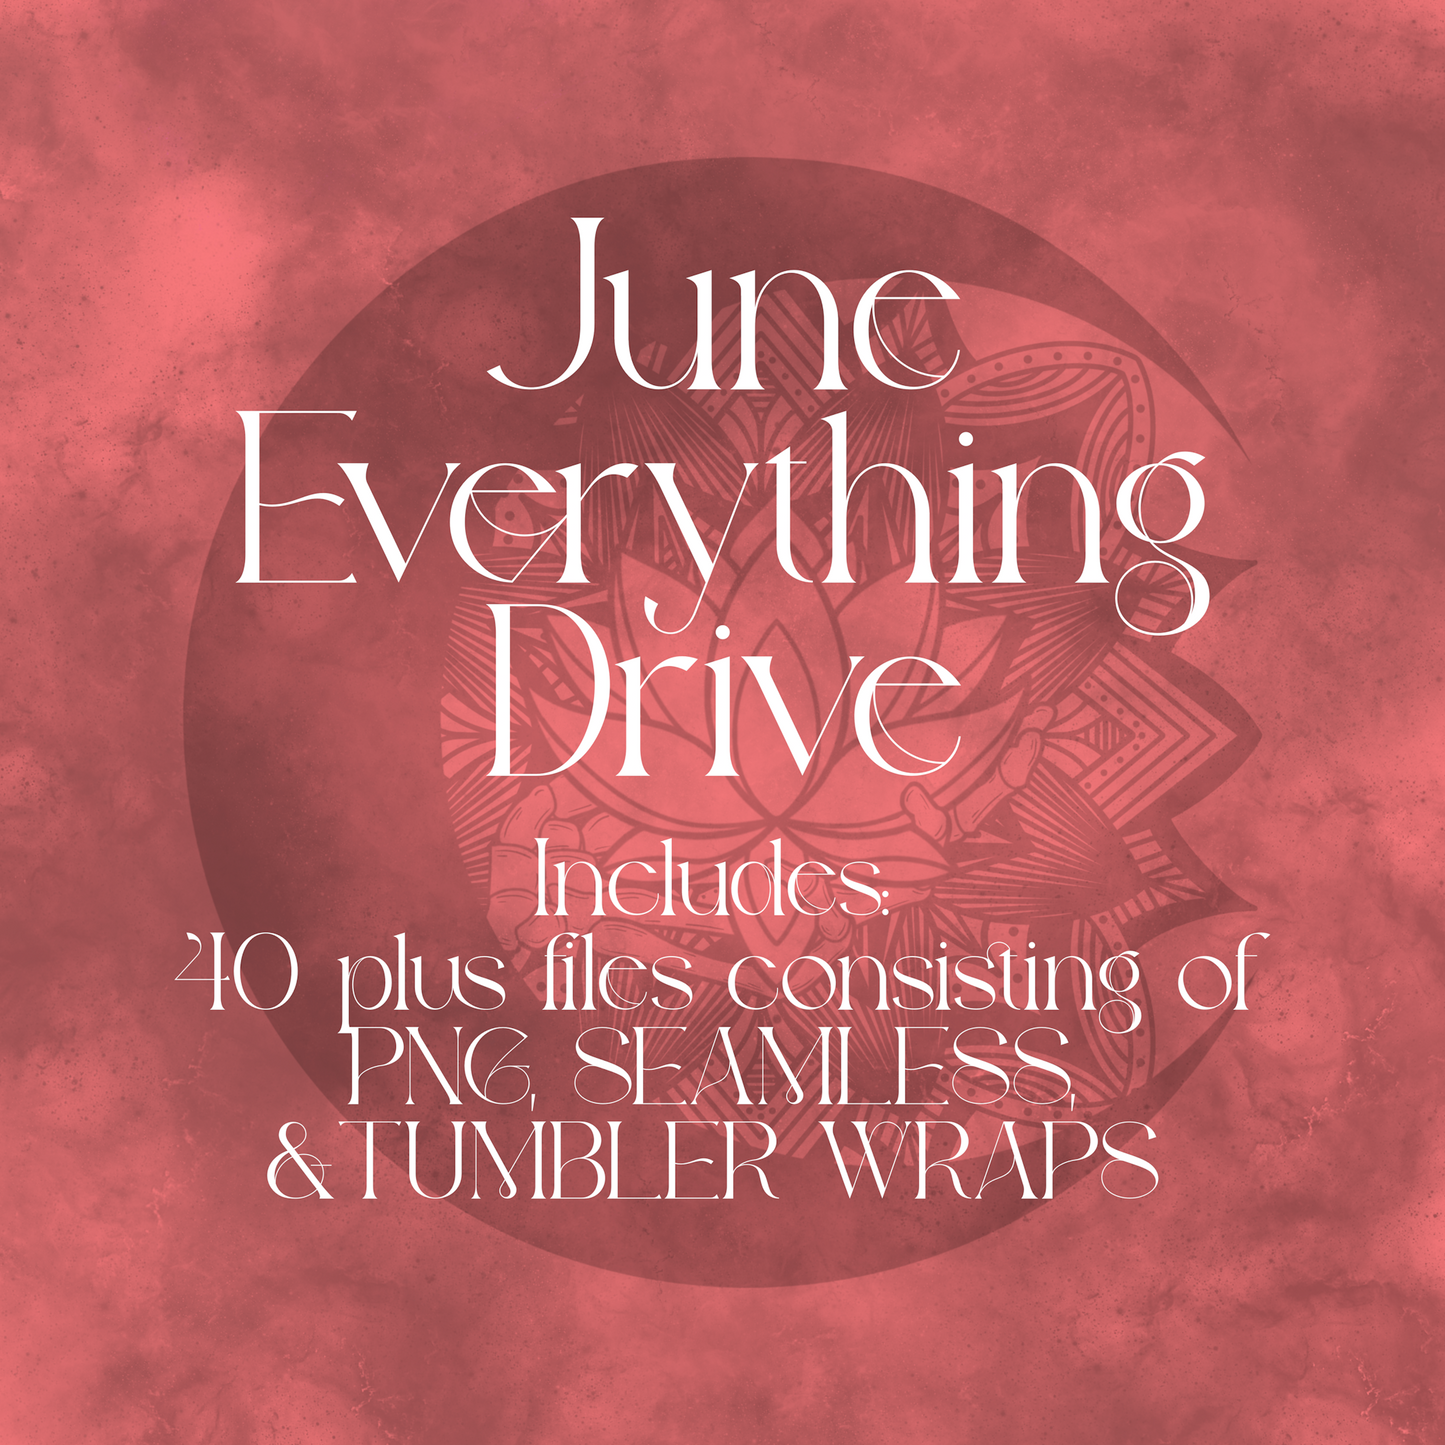 June Everything Drive